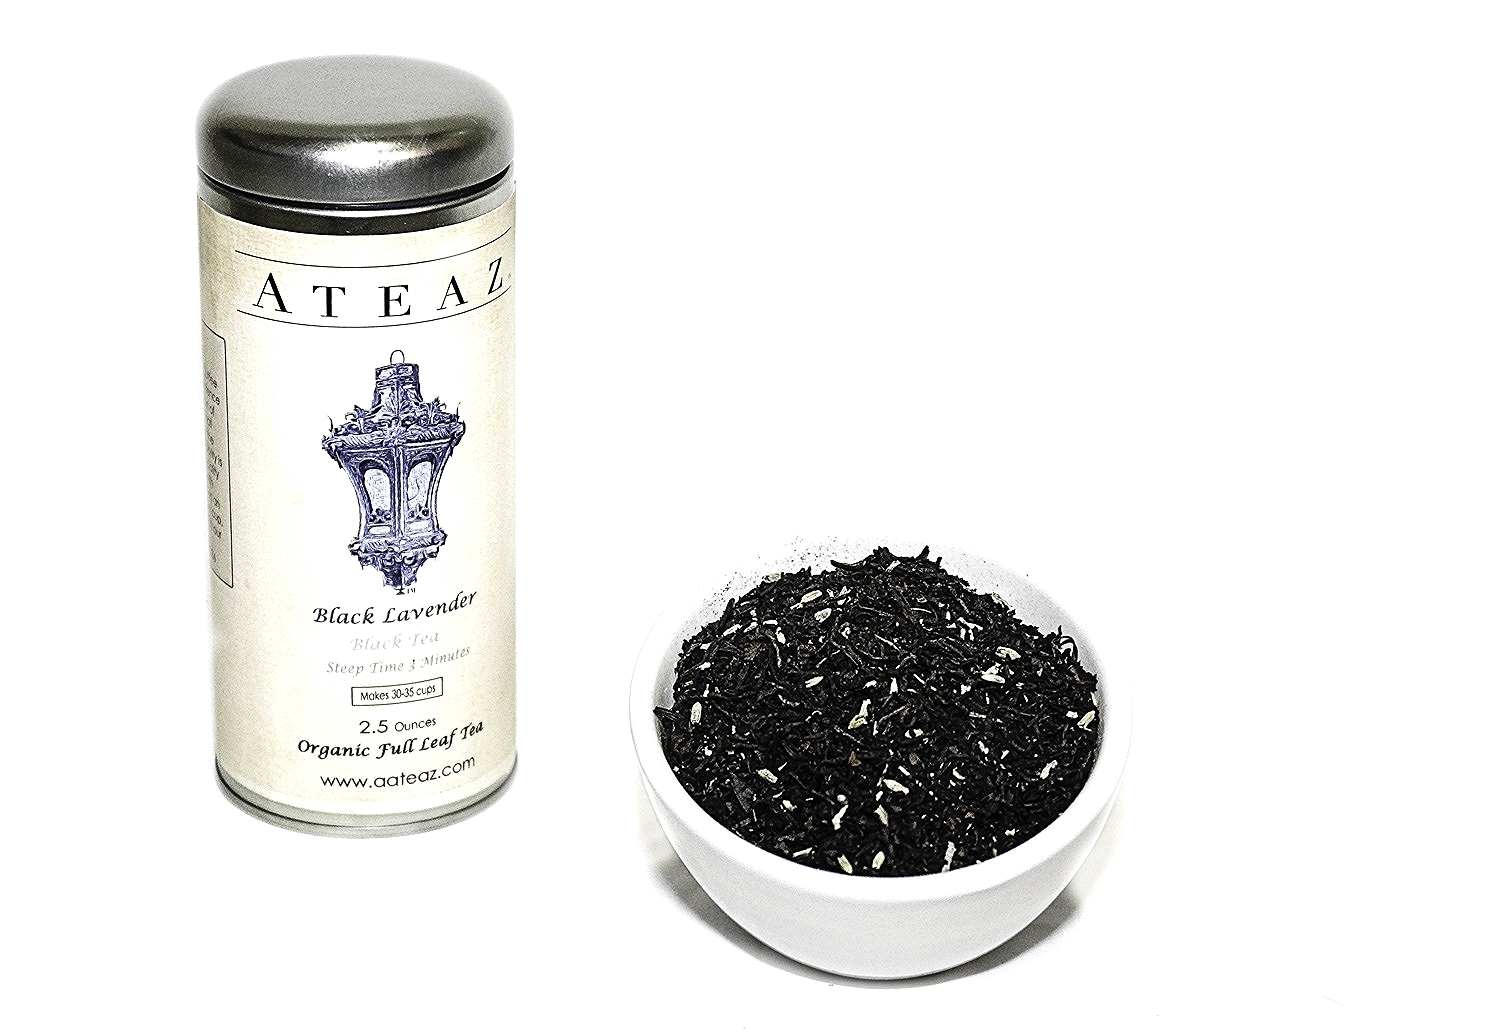 Try Our Black Lavender Black Tea With A Twist...